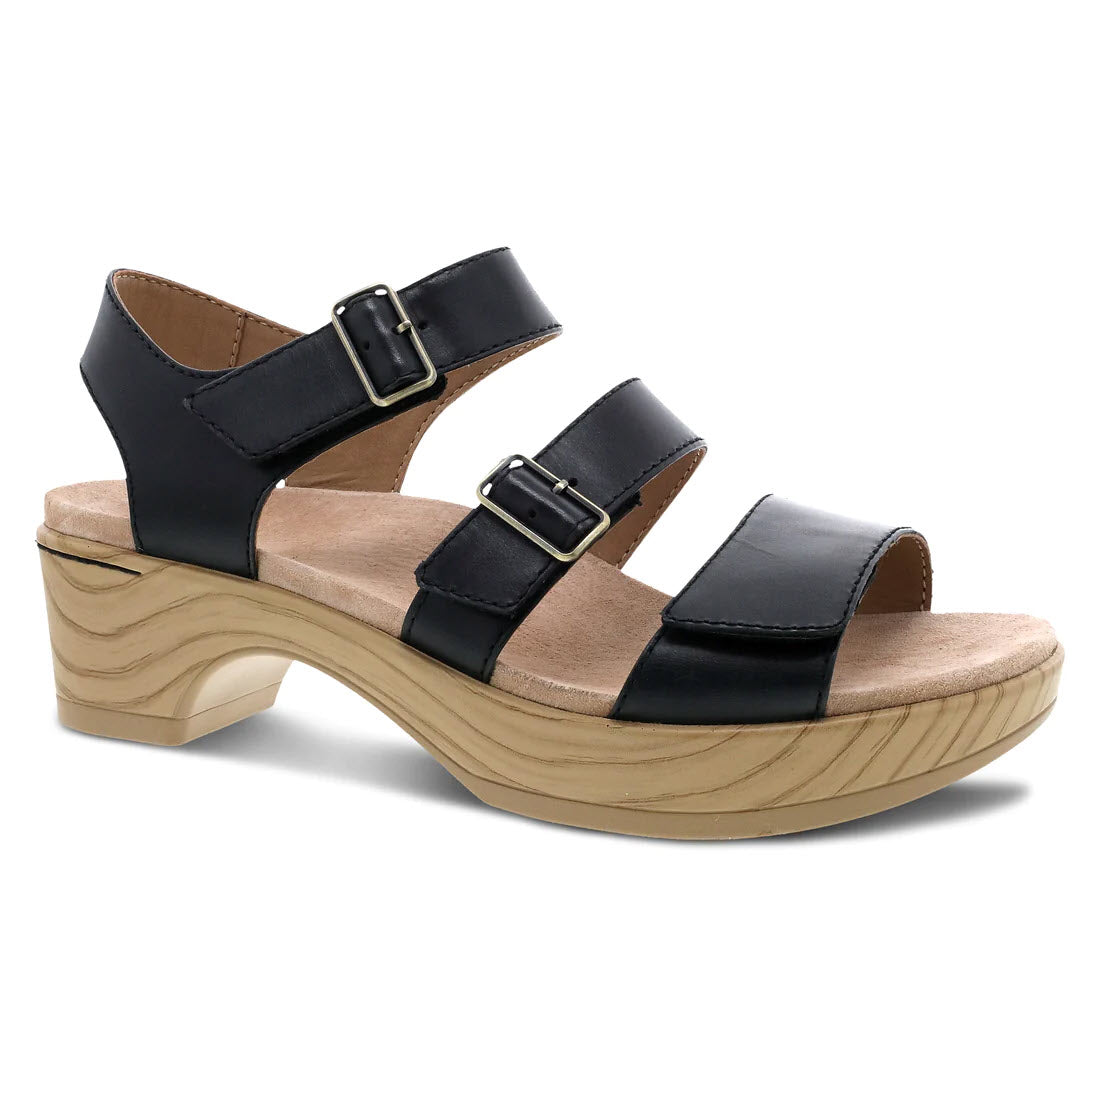 Dansko Malena black triple strap sandals with buckles, featuring a chunky wooden heel and a light-colored sole.